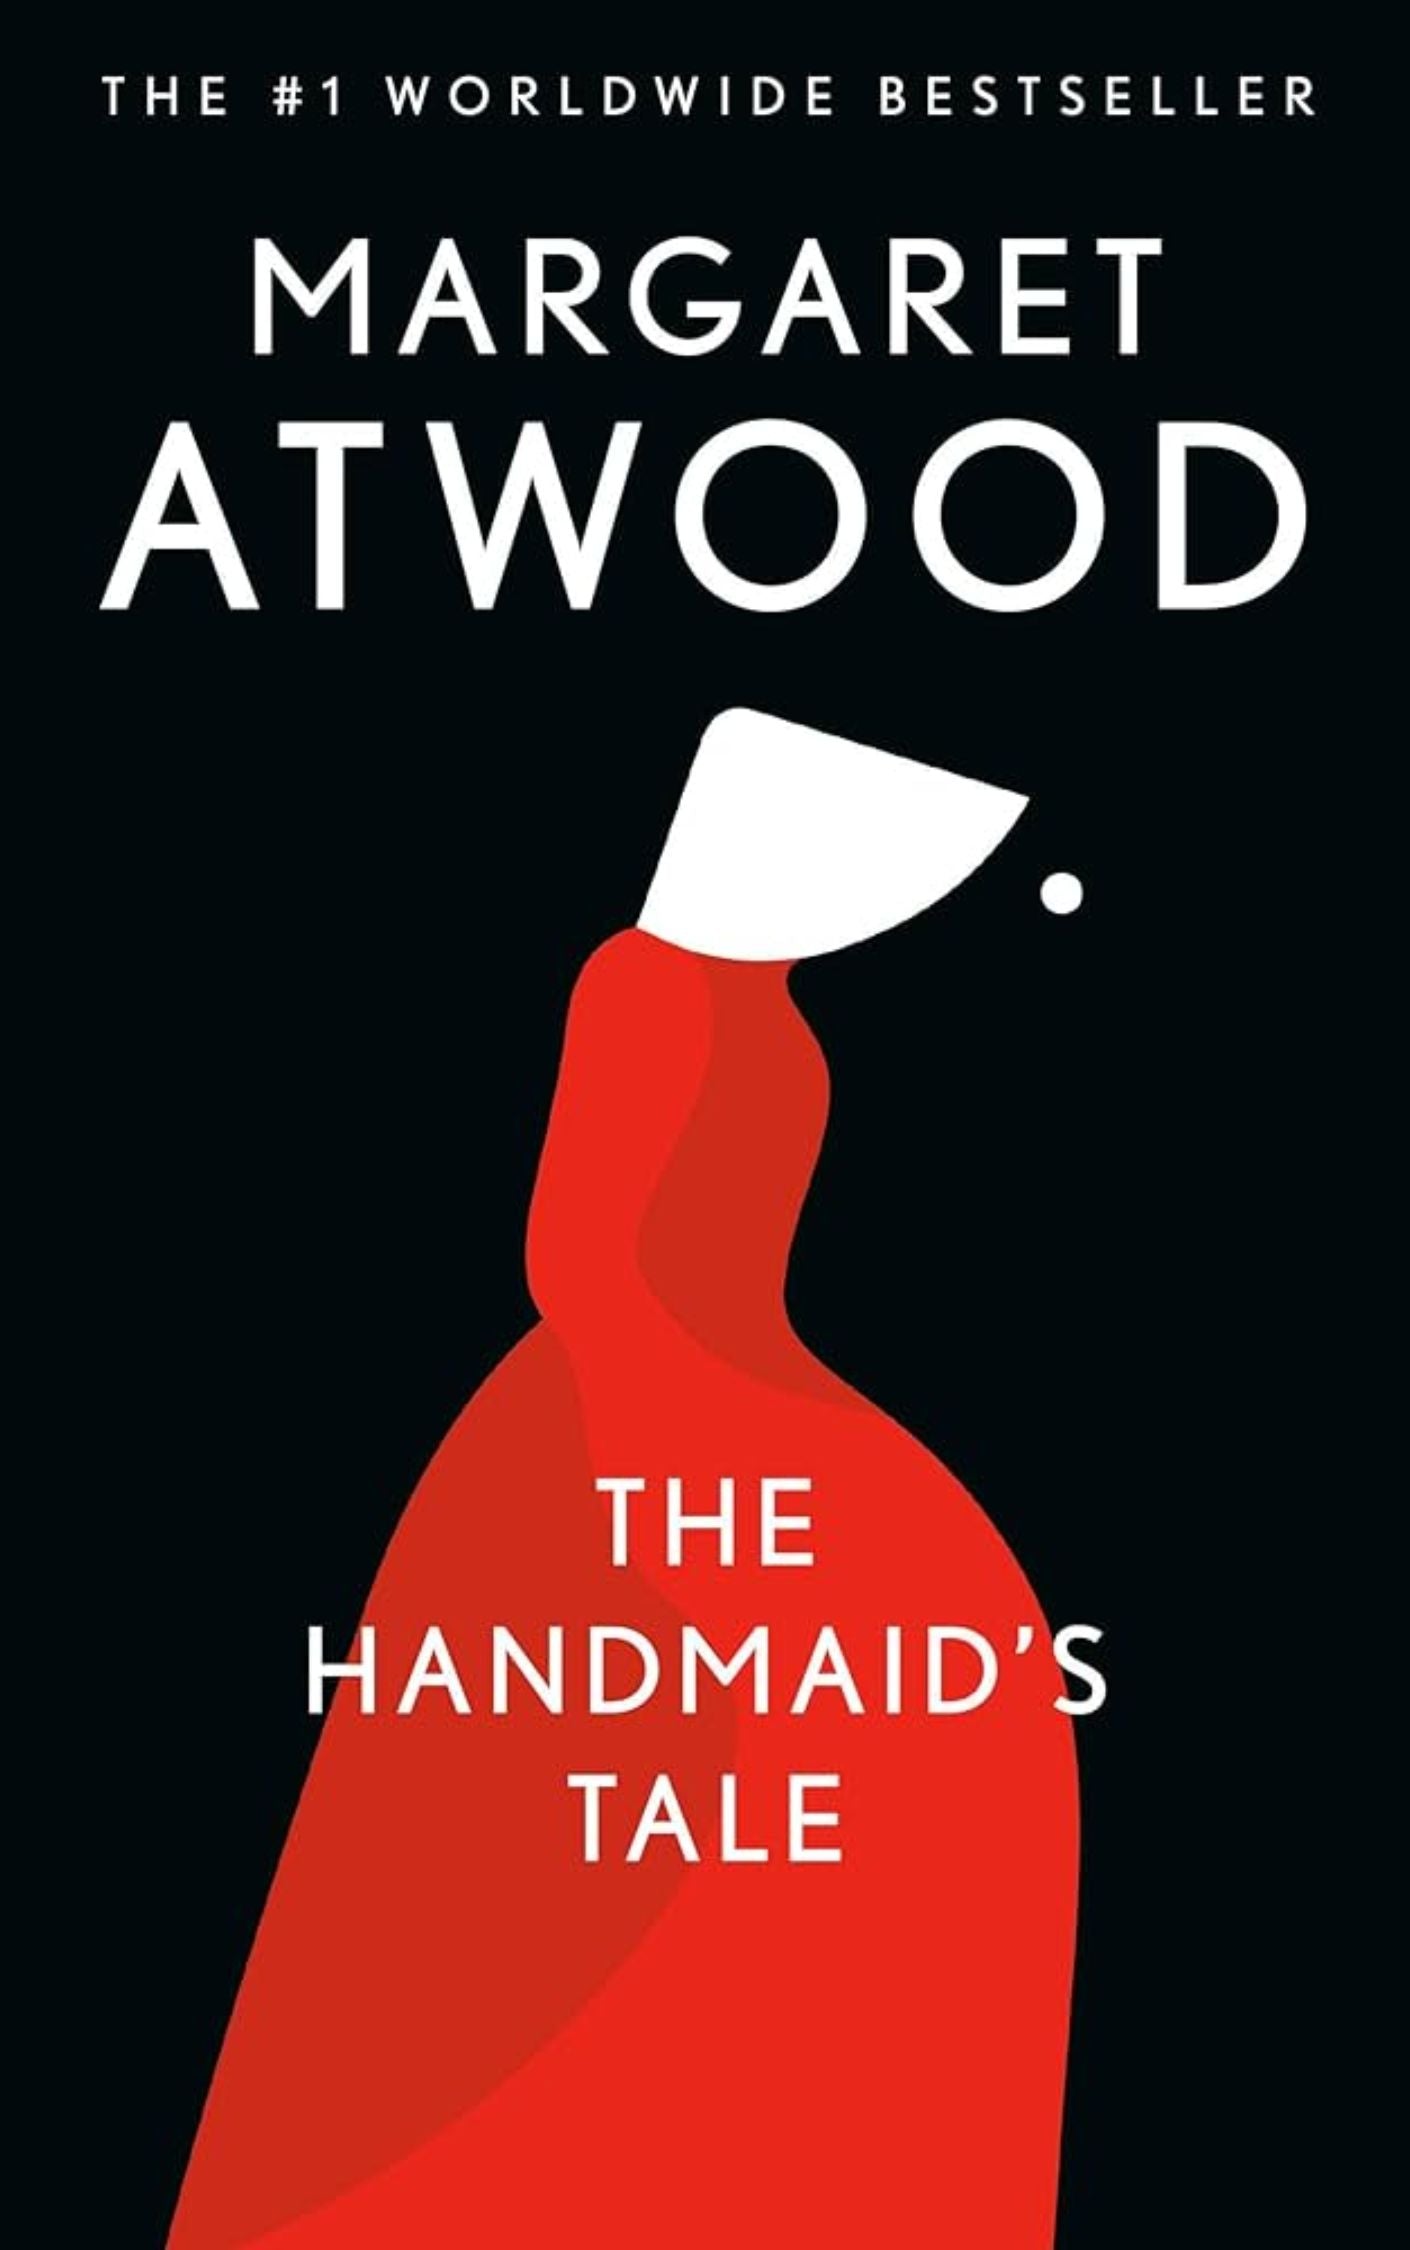 "The Handmaid's Tale" by Margaret Atwood: Books for Women